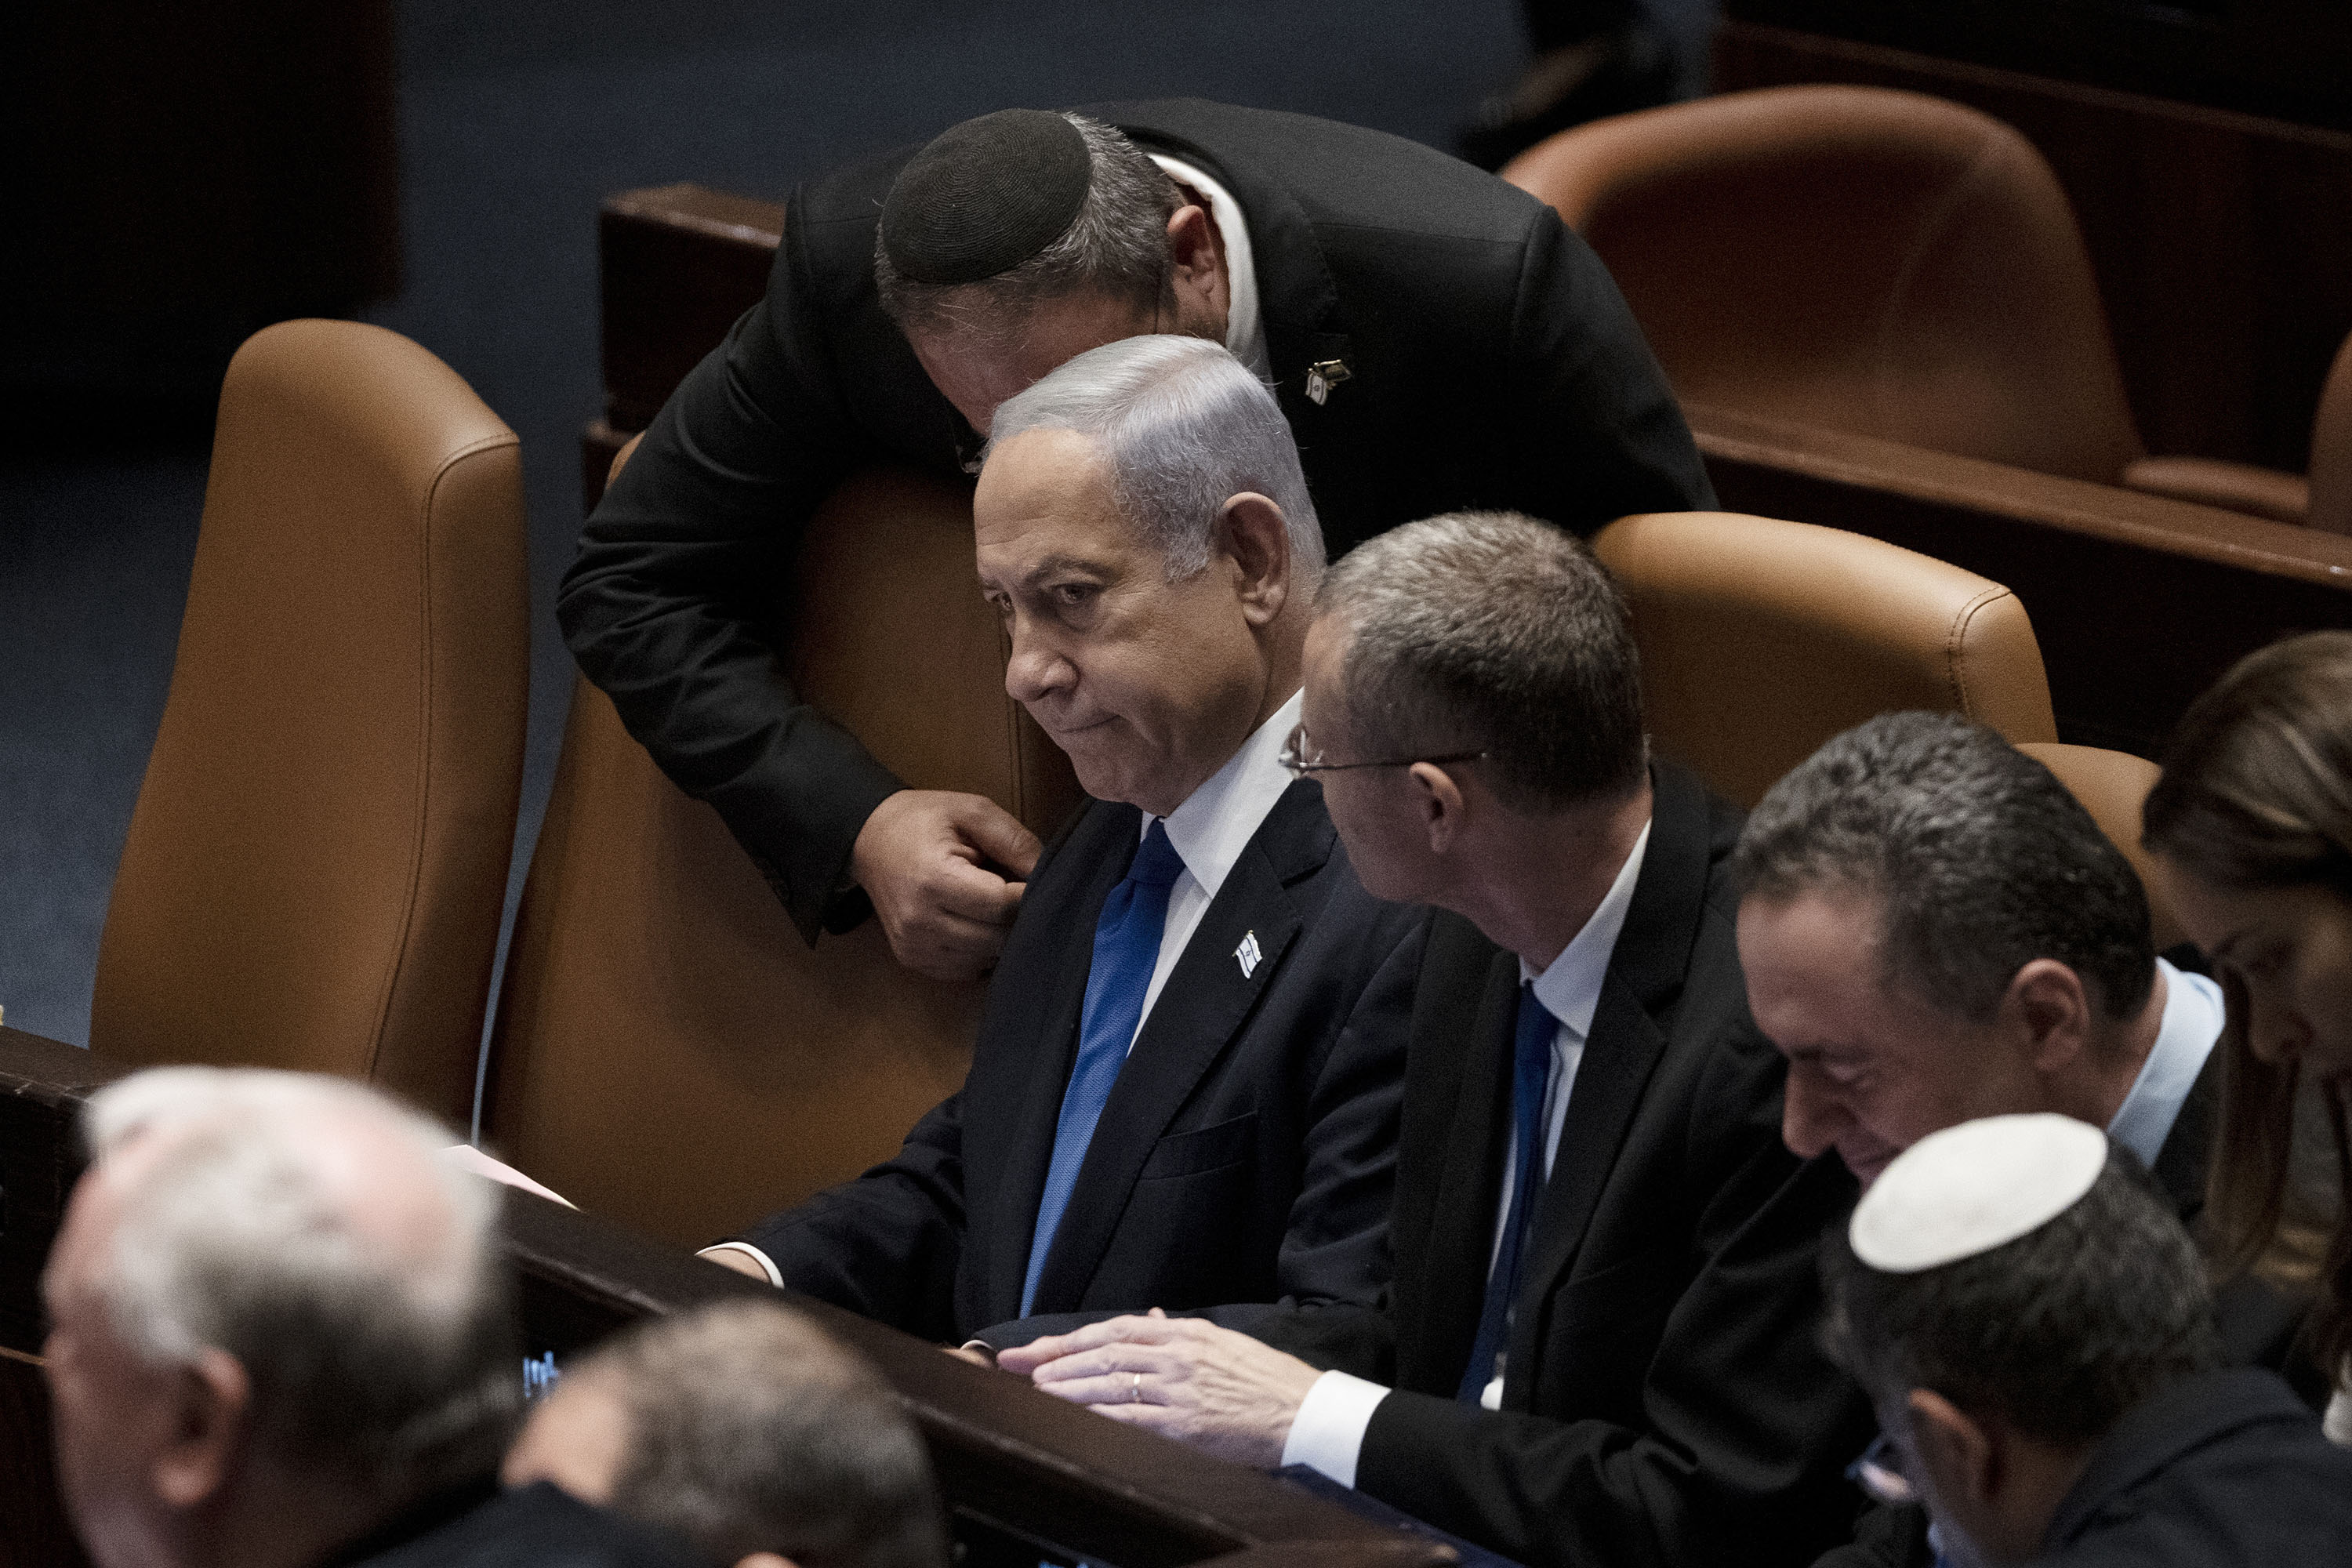 Israel's Prime Minister Benjamin Netanyahu, center, is surrounded by lawmakers at a session of the Knesset, Israel's parliament, in Jerusalem, Israel, Monday, July 24.